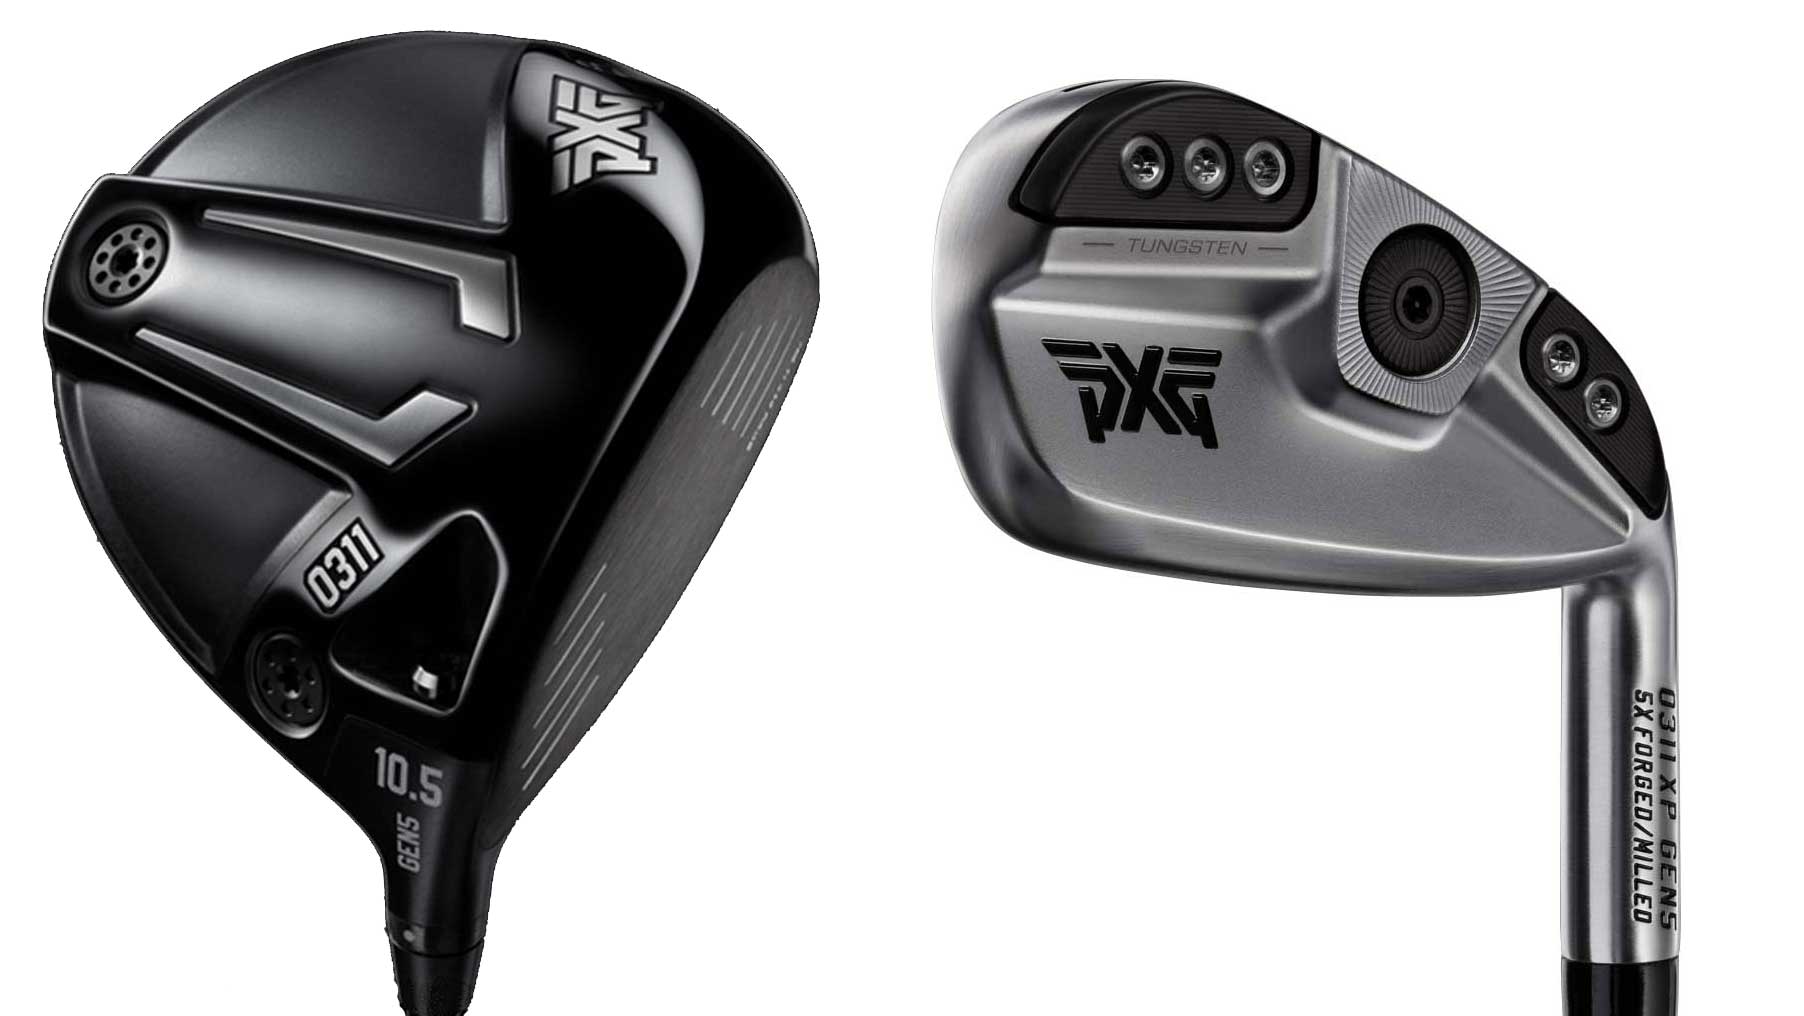 New PXG golf clubs for 2023 (drivers, irons, woods, hybrids) HotSport